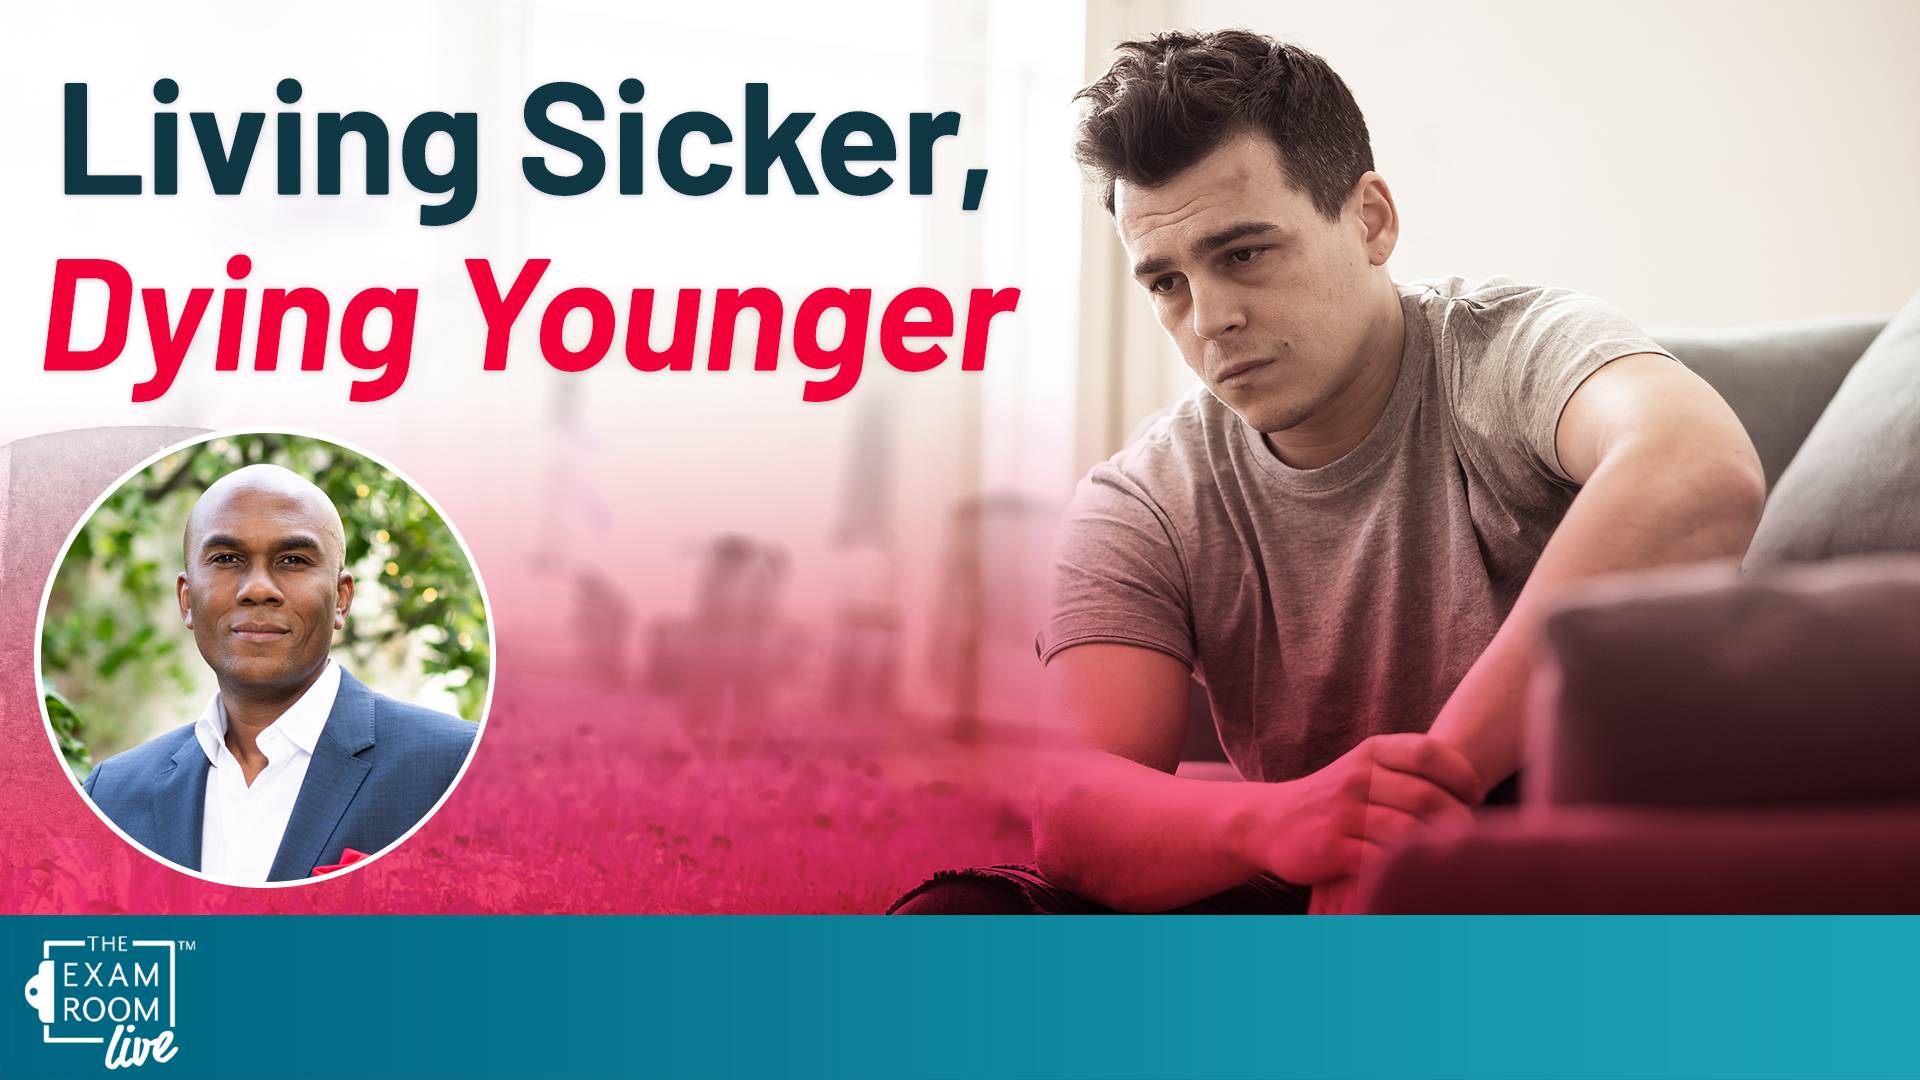 Living Sicker and Dying Younger